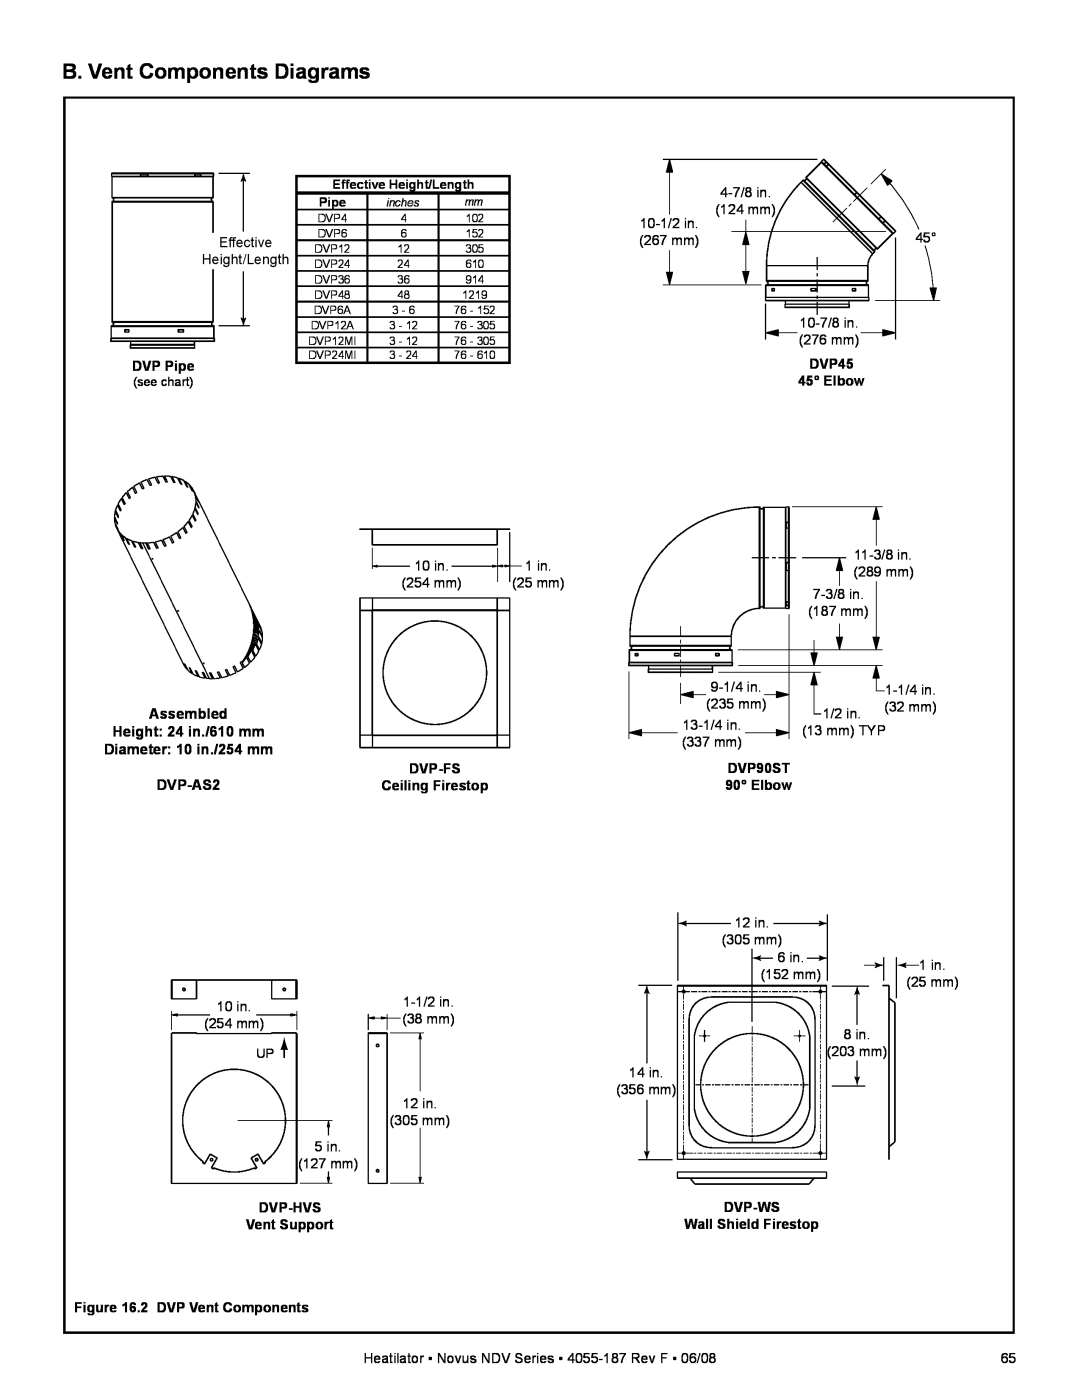 Hearth and Home Technologies NDV3630 B. Vent Components Diagrams, Height/Length, DVP Pipe, DVP-AS2, Dvp-Fs, DVP45 45 Elbow 